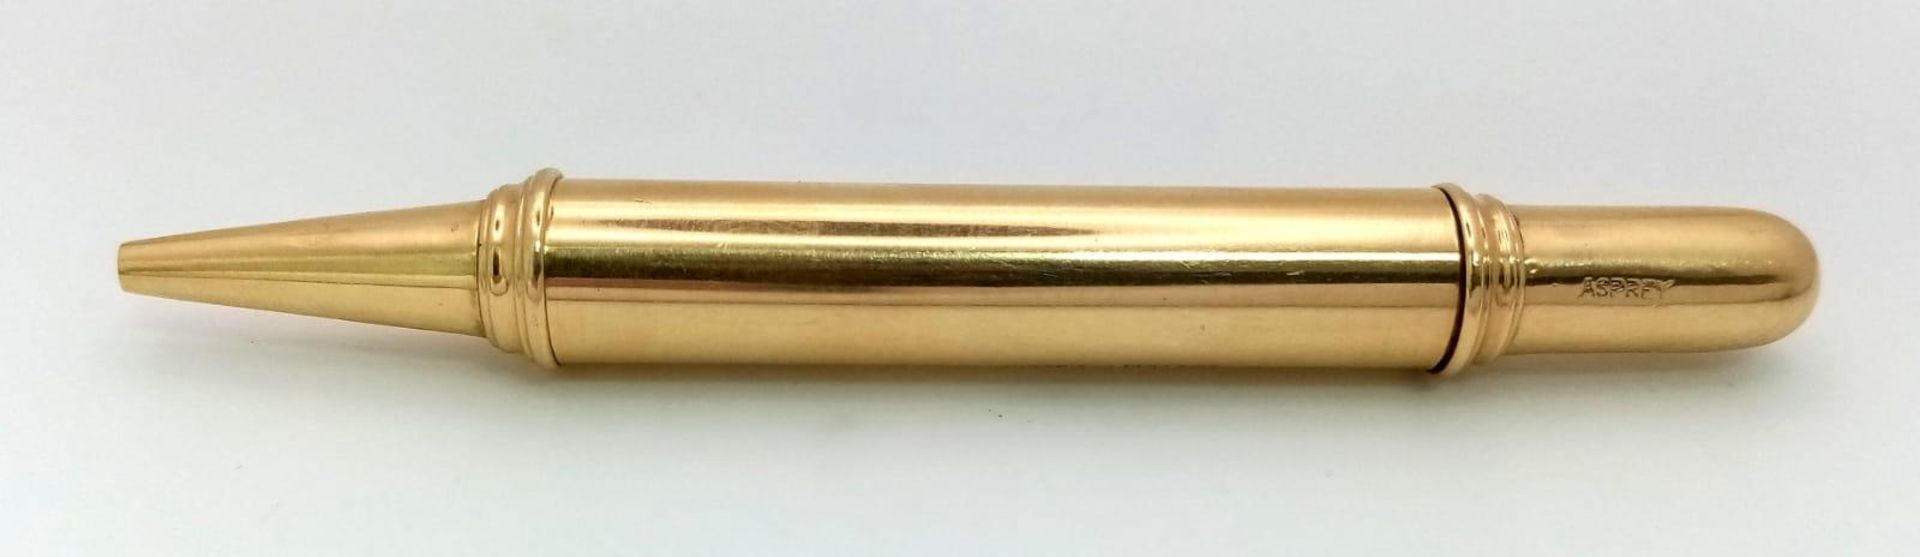 An Asprey of London 18K Yellow Gold Small Pen. Full UK hallmarks. 9cm. 22.7g total weight. No ink - Image 3 of 5